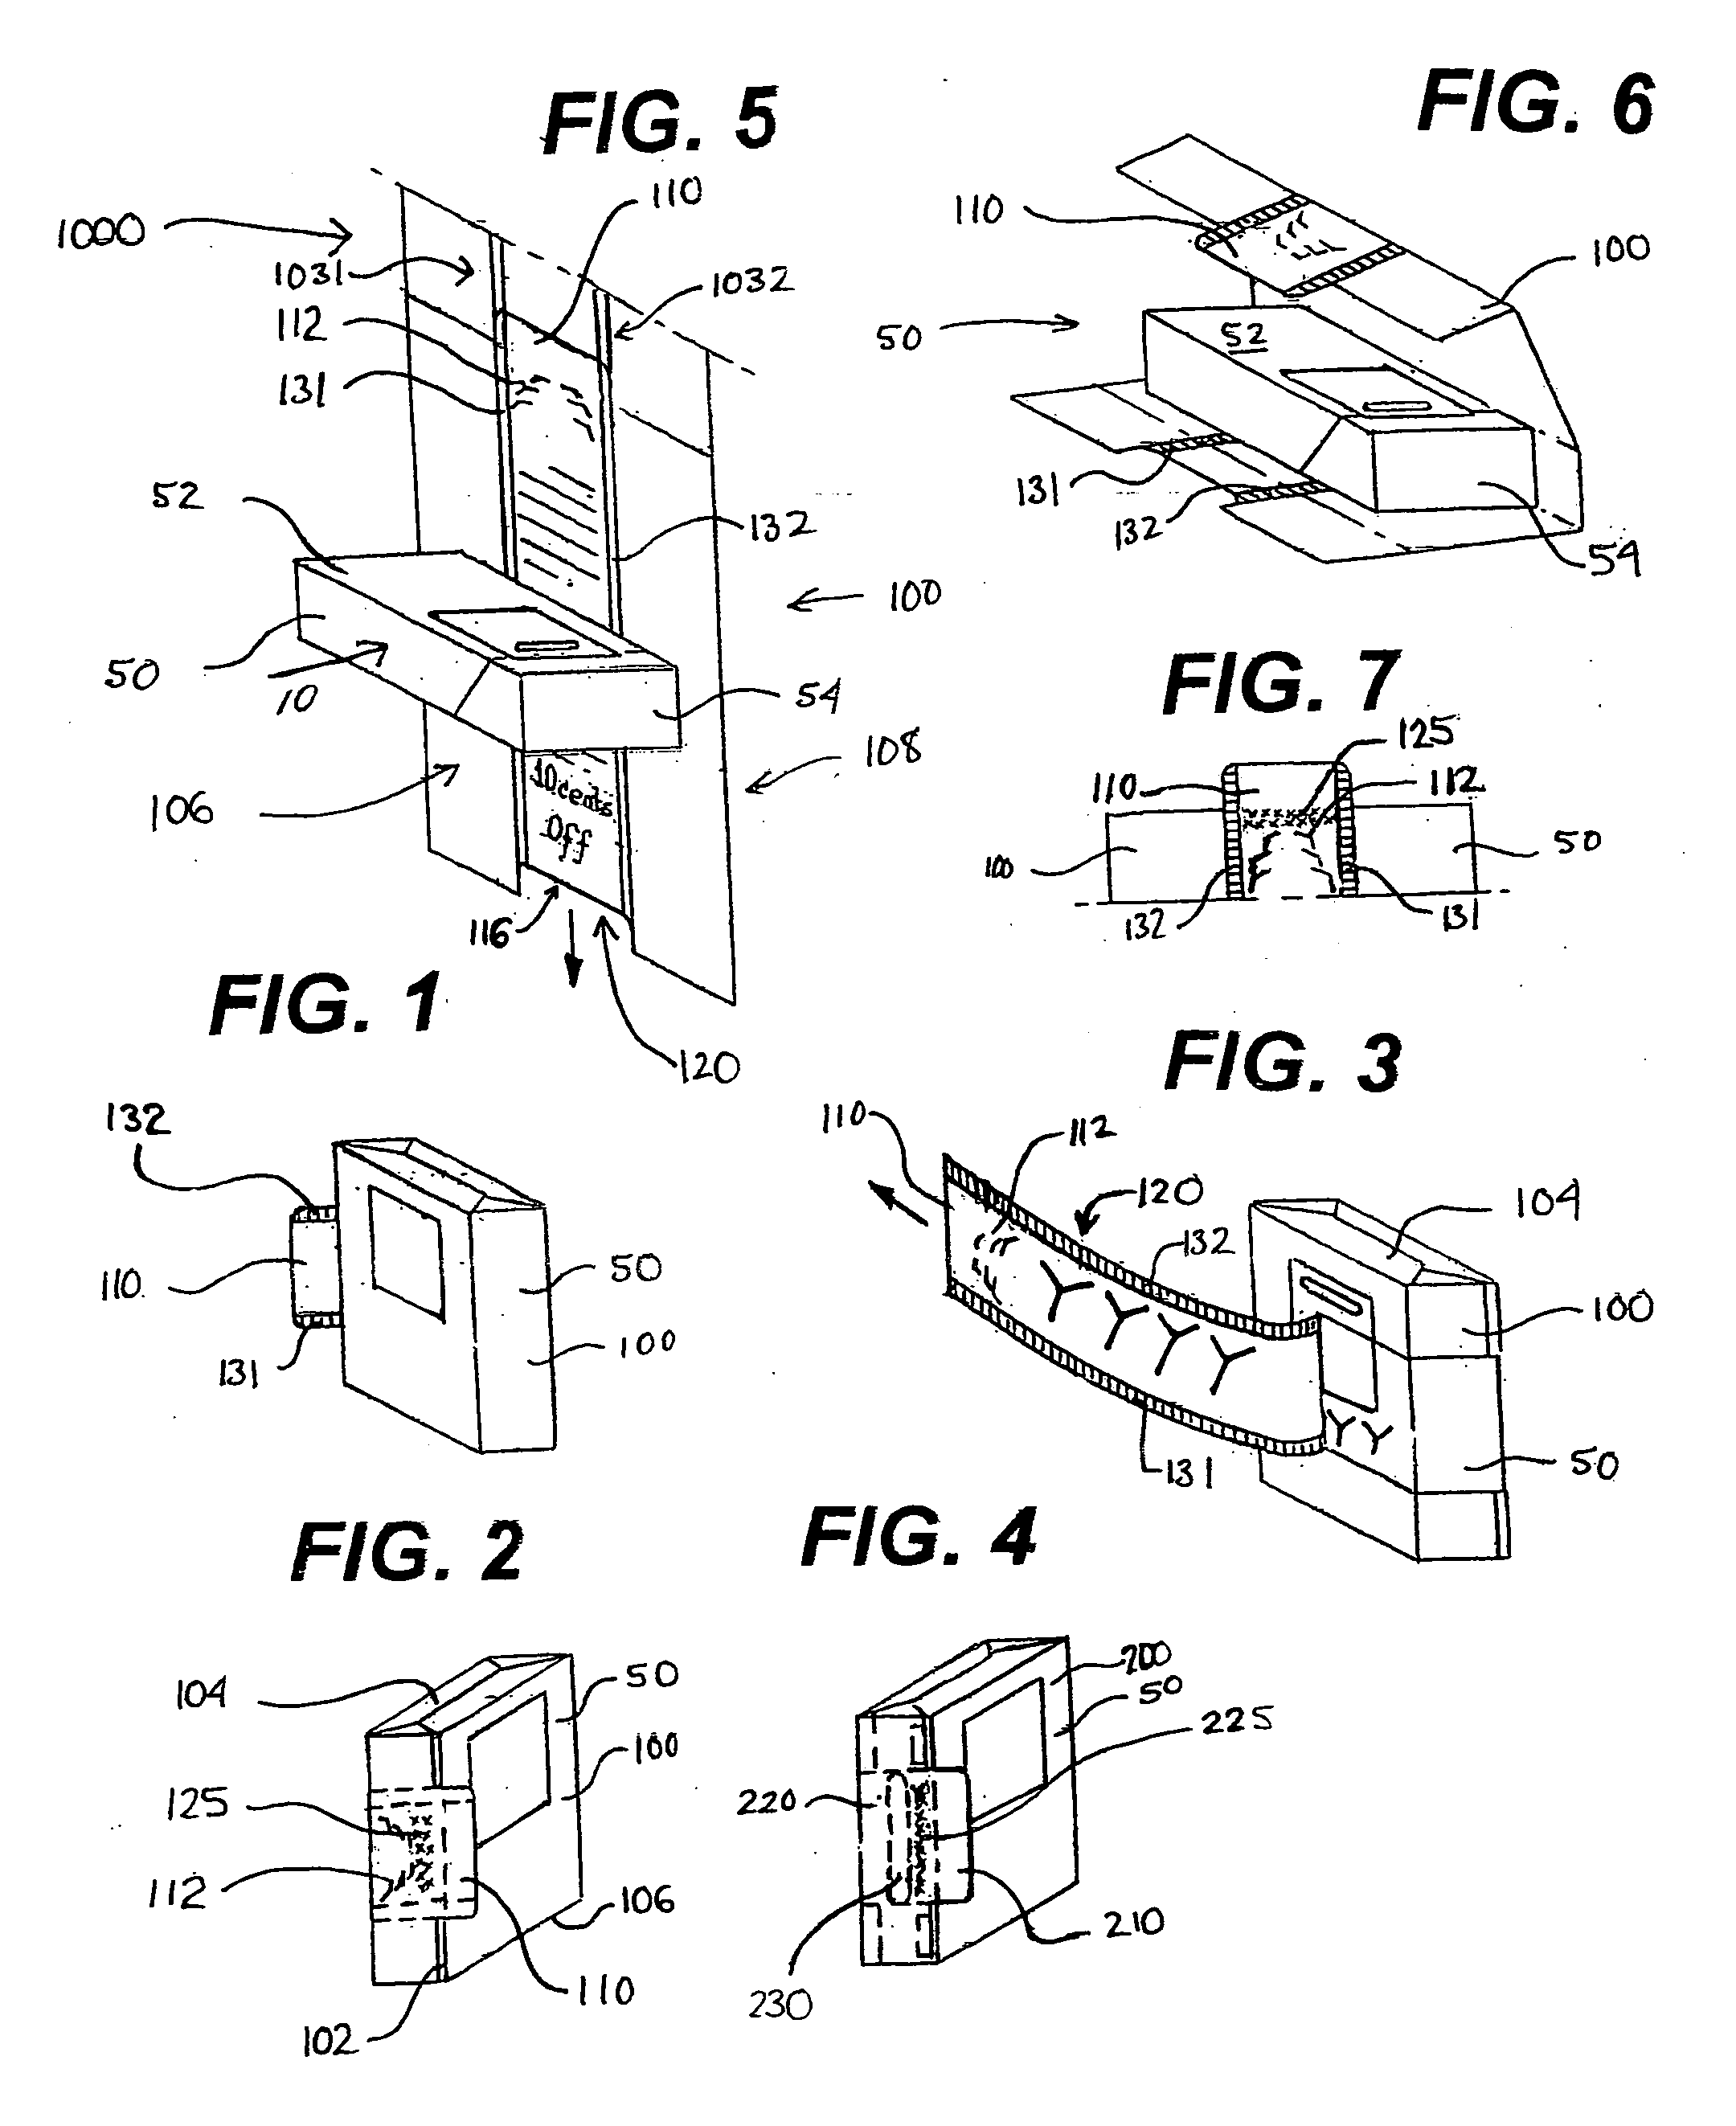 Films for envelopment of packages and methods of making thereof